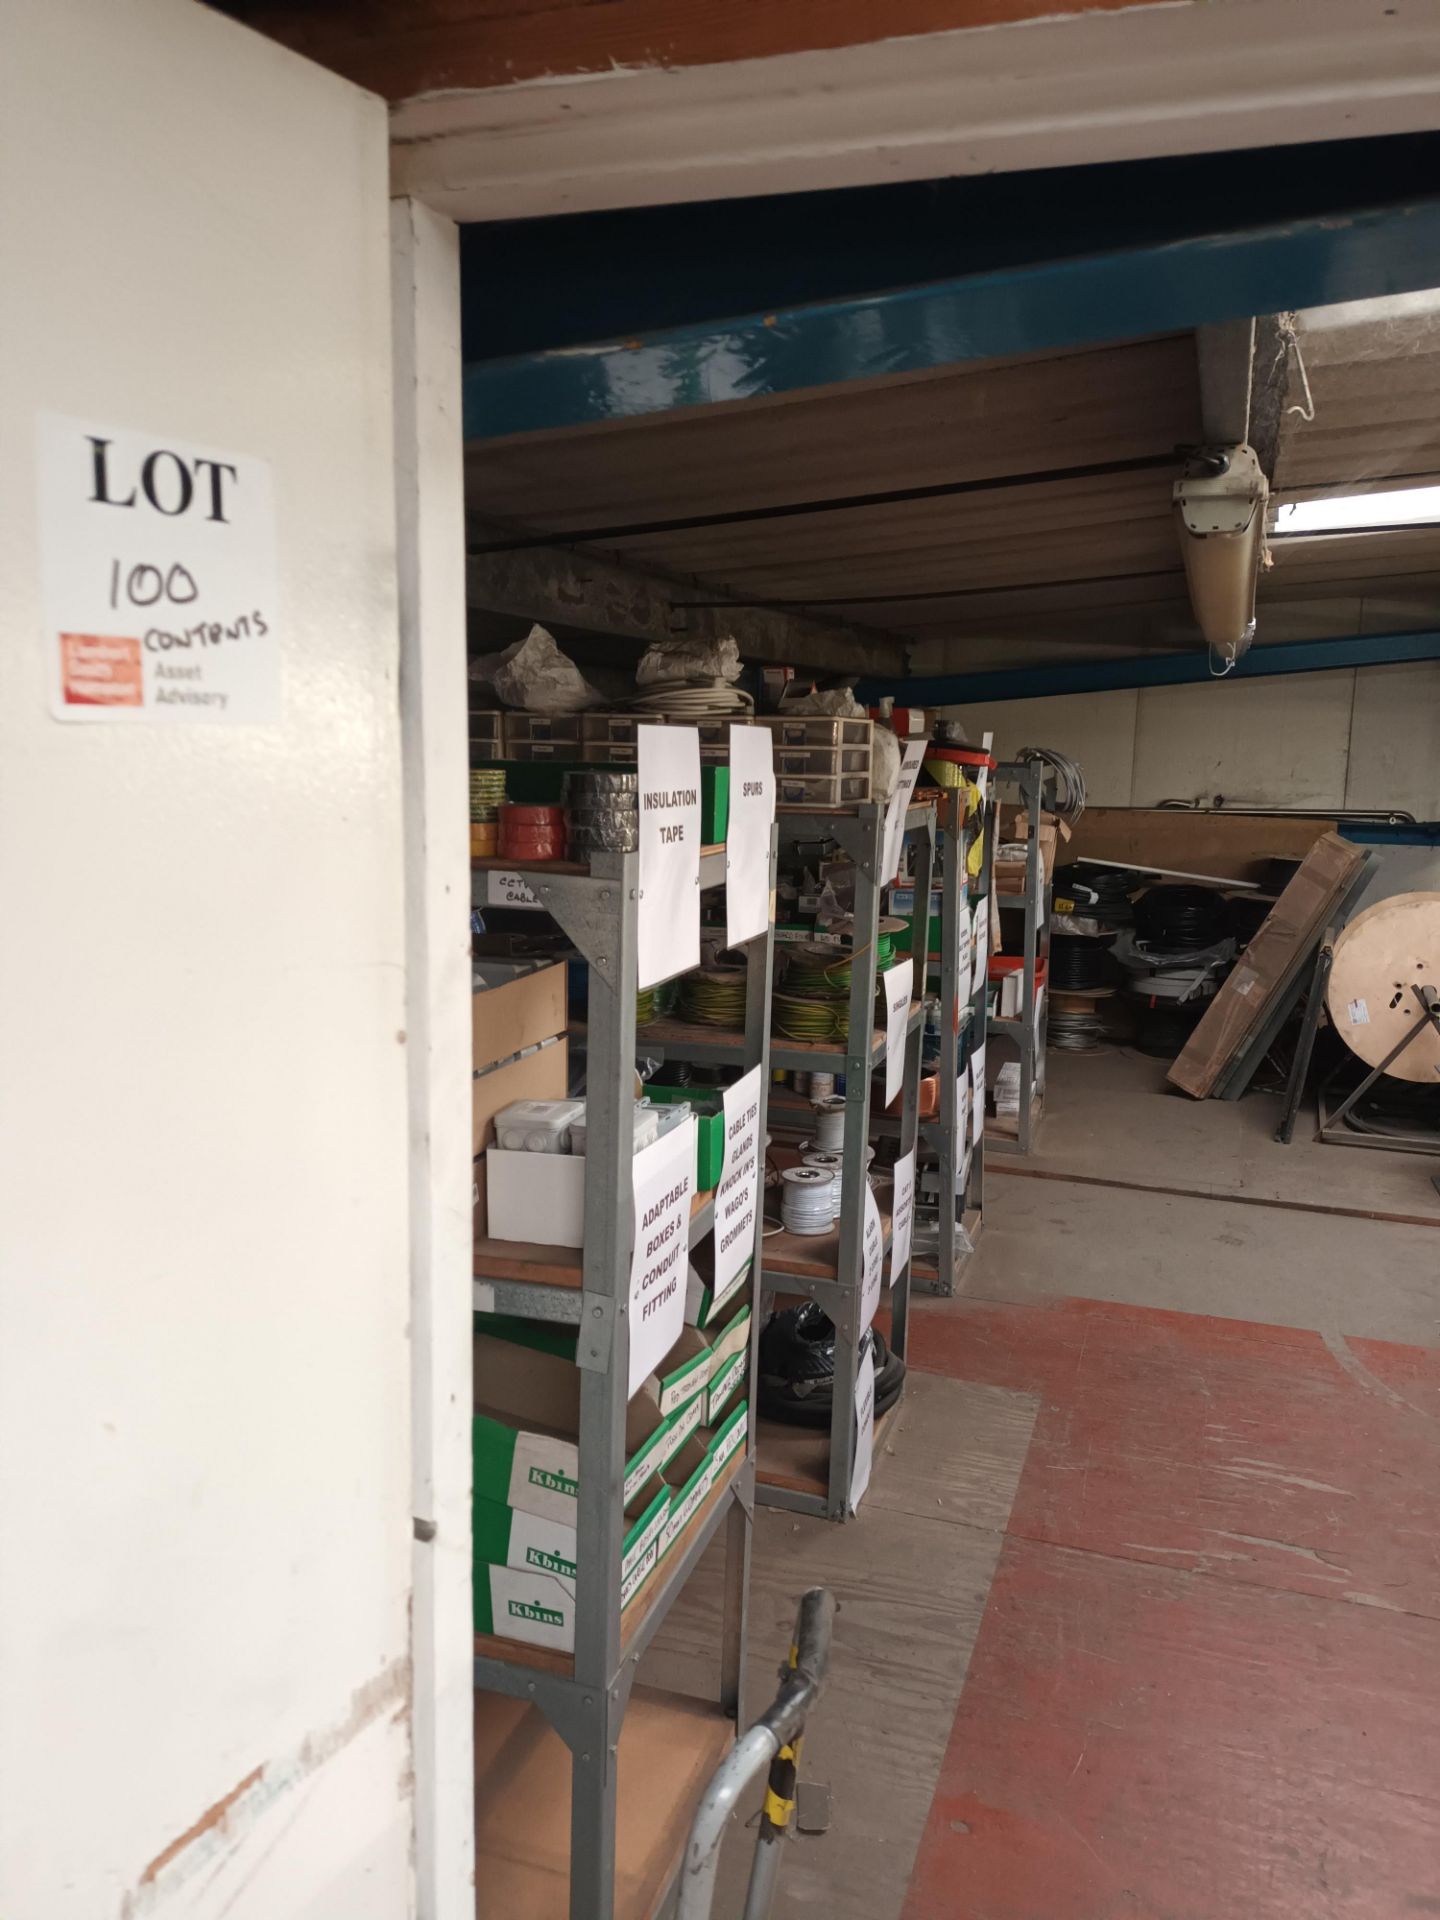 Contents of upstairs stock room to include large quantity of various wire insulation tape, adaptable